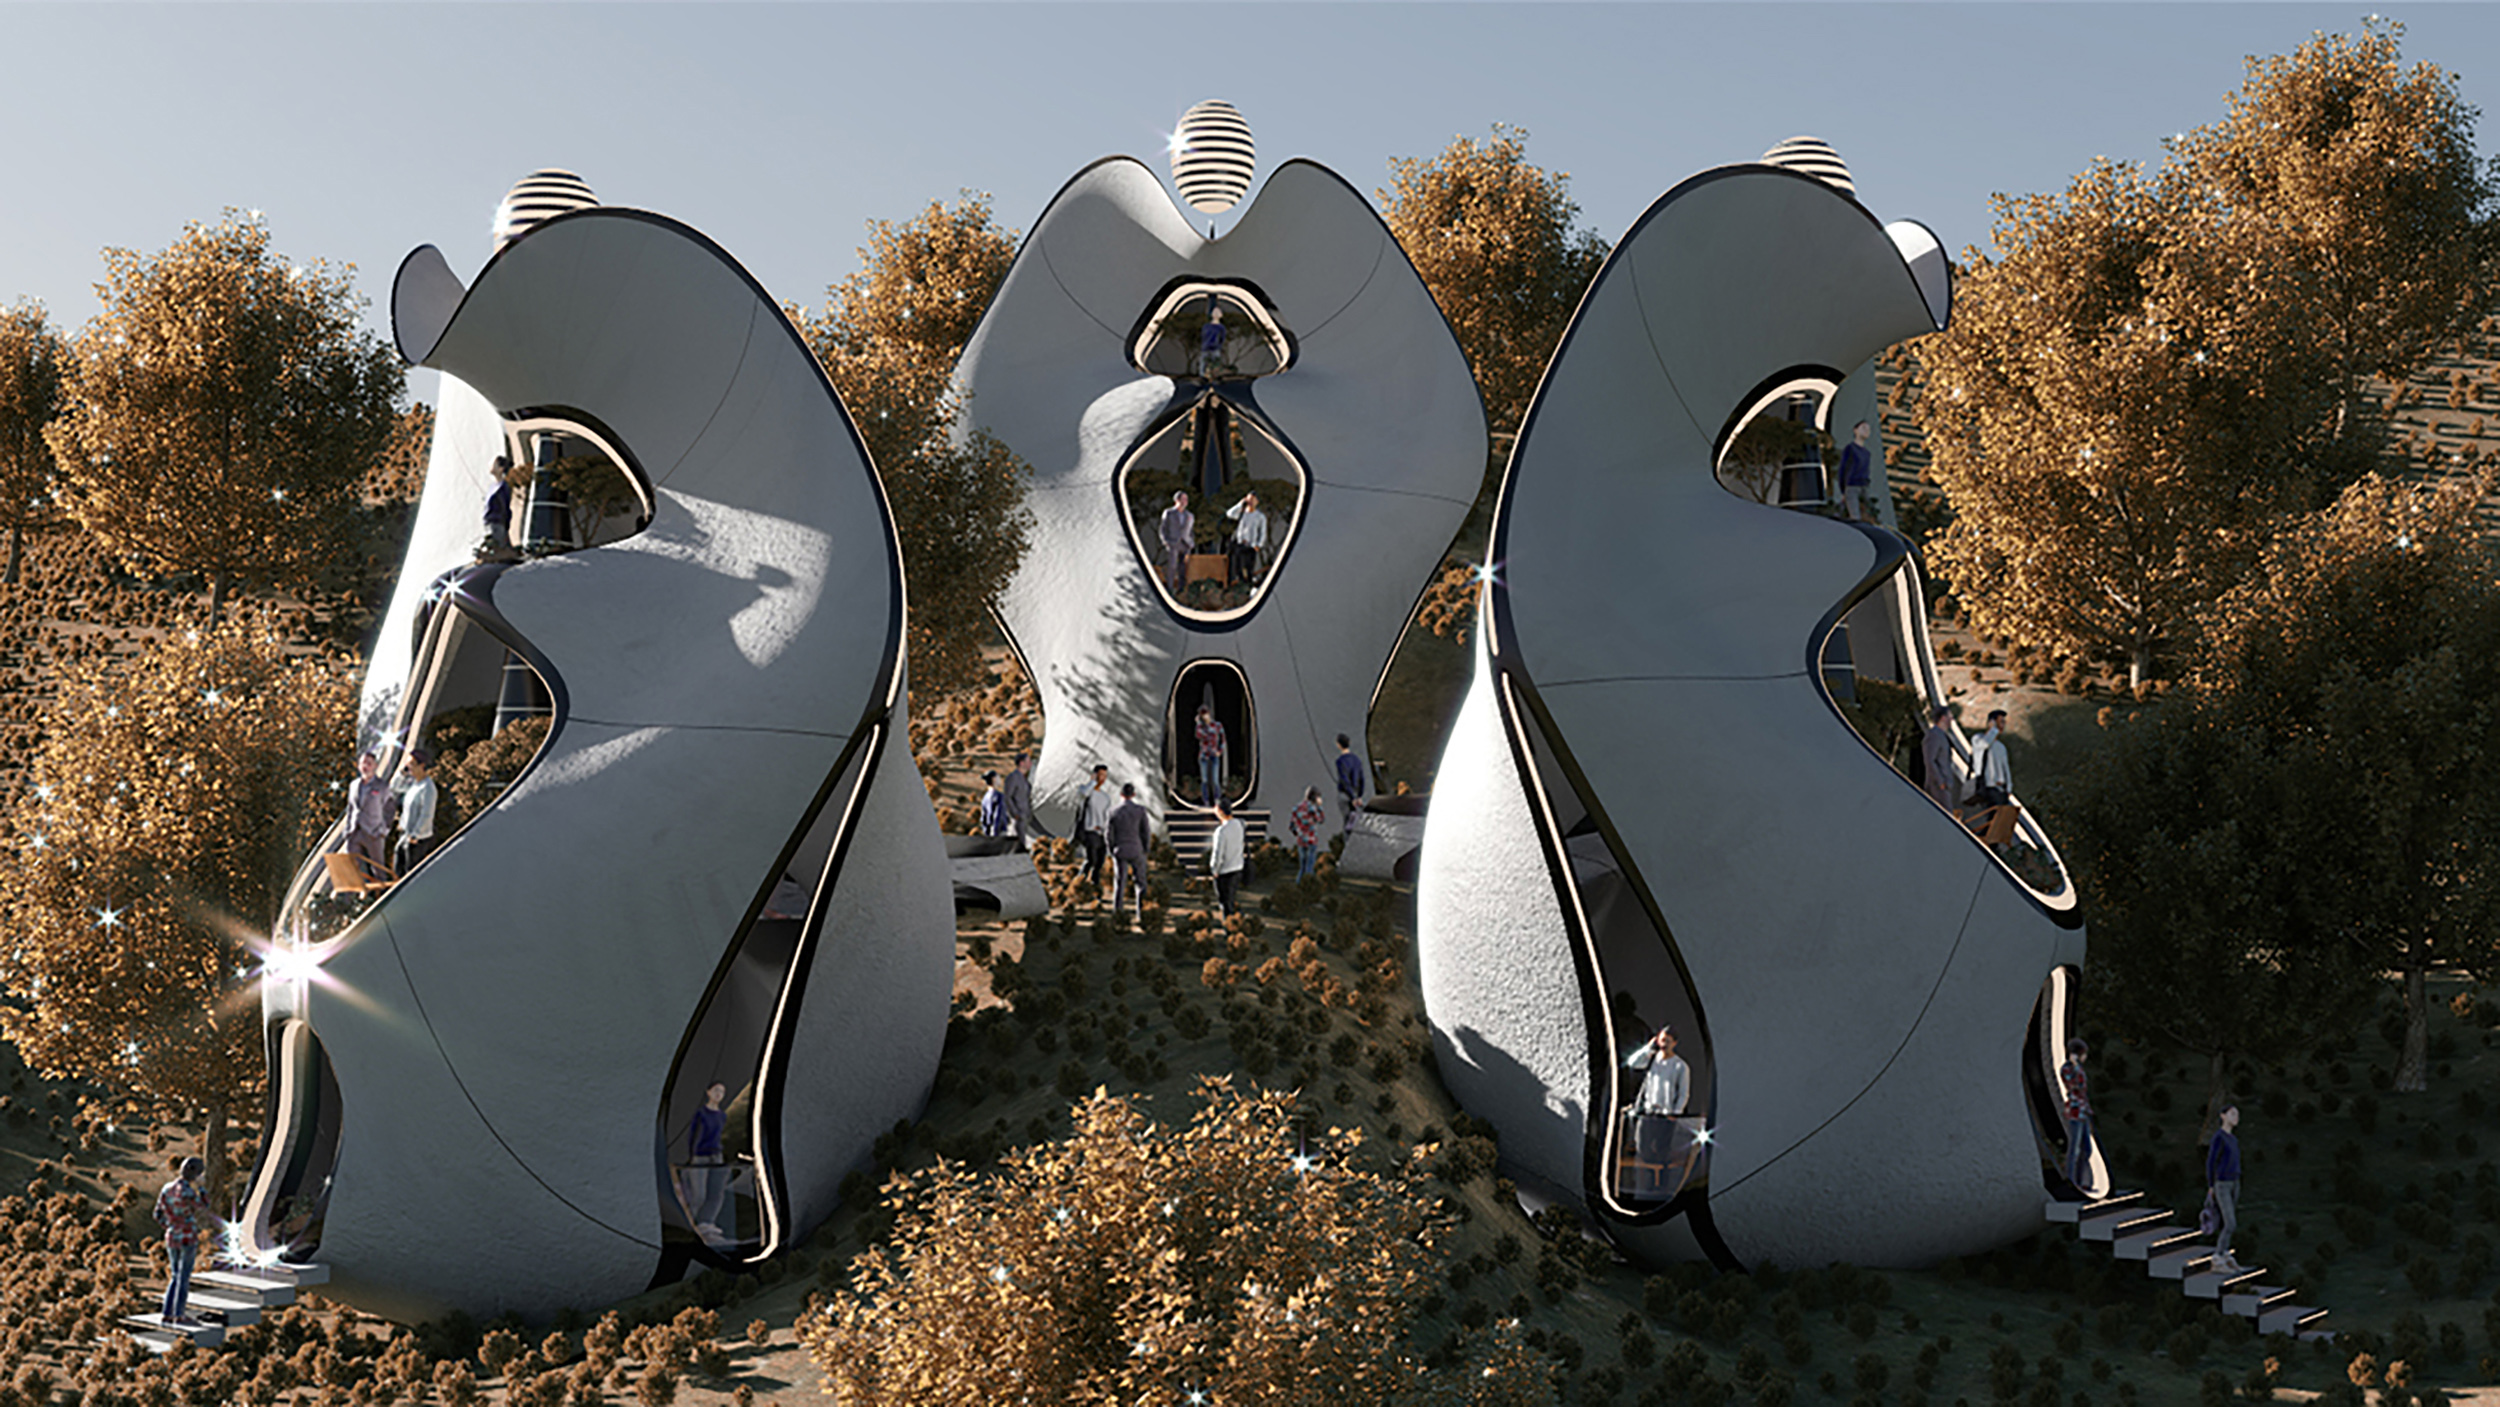 Render of the 3D printed houses within the Madre Natura development. Image via MASK Architects.